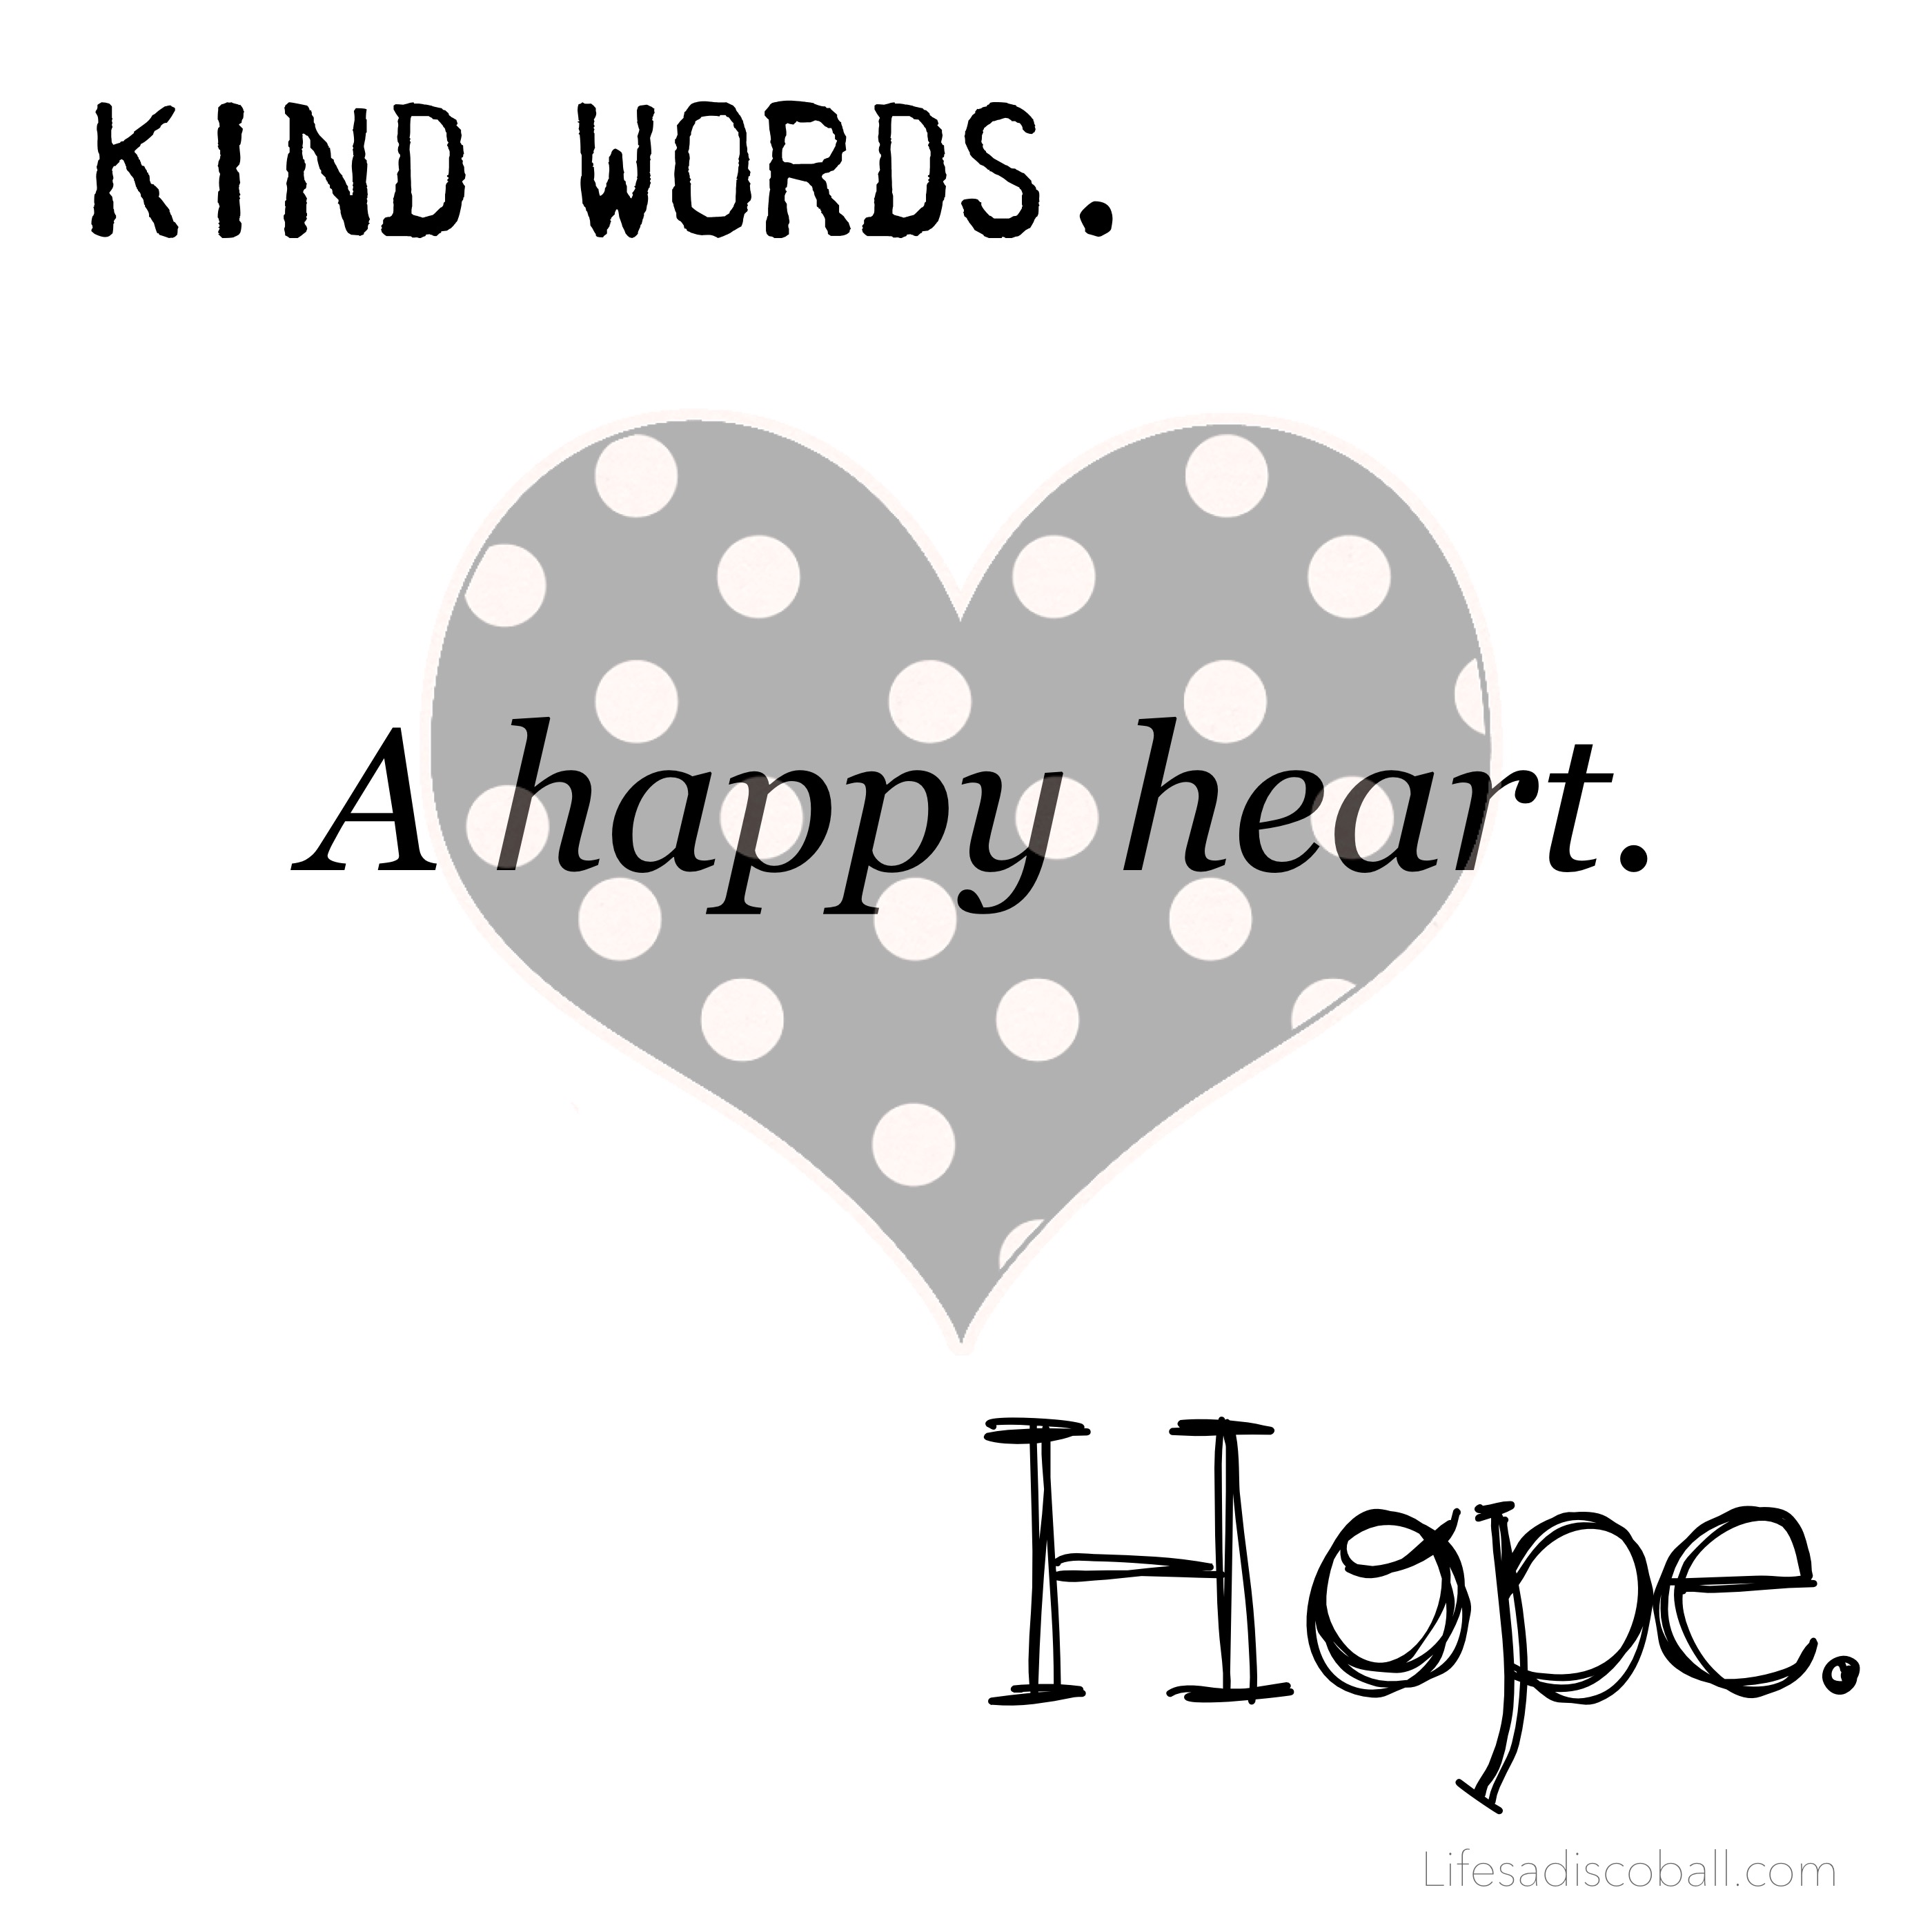 One Call, Kind Words, a Happy Heart and Hope - Hacked by MrSqar